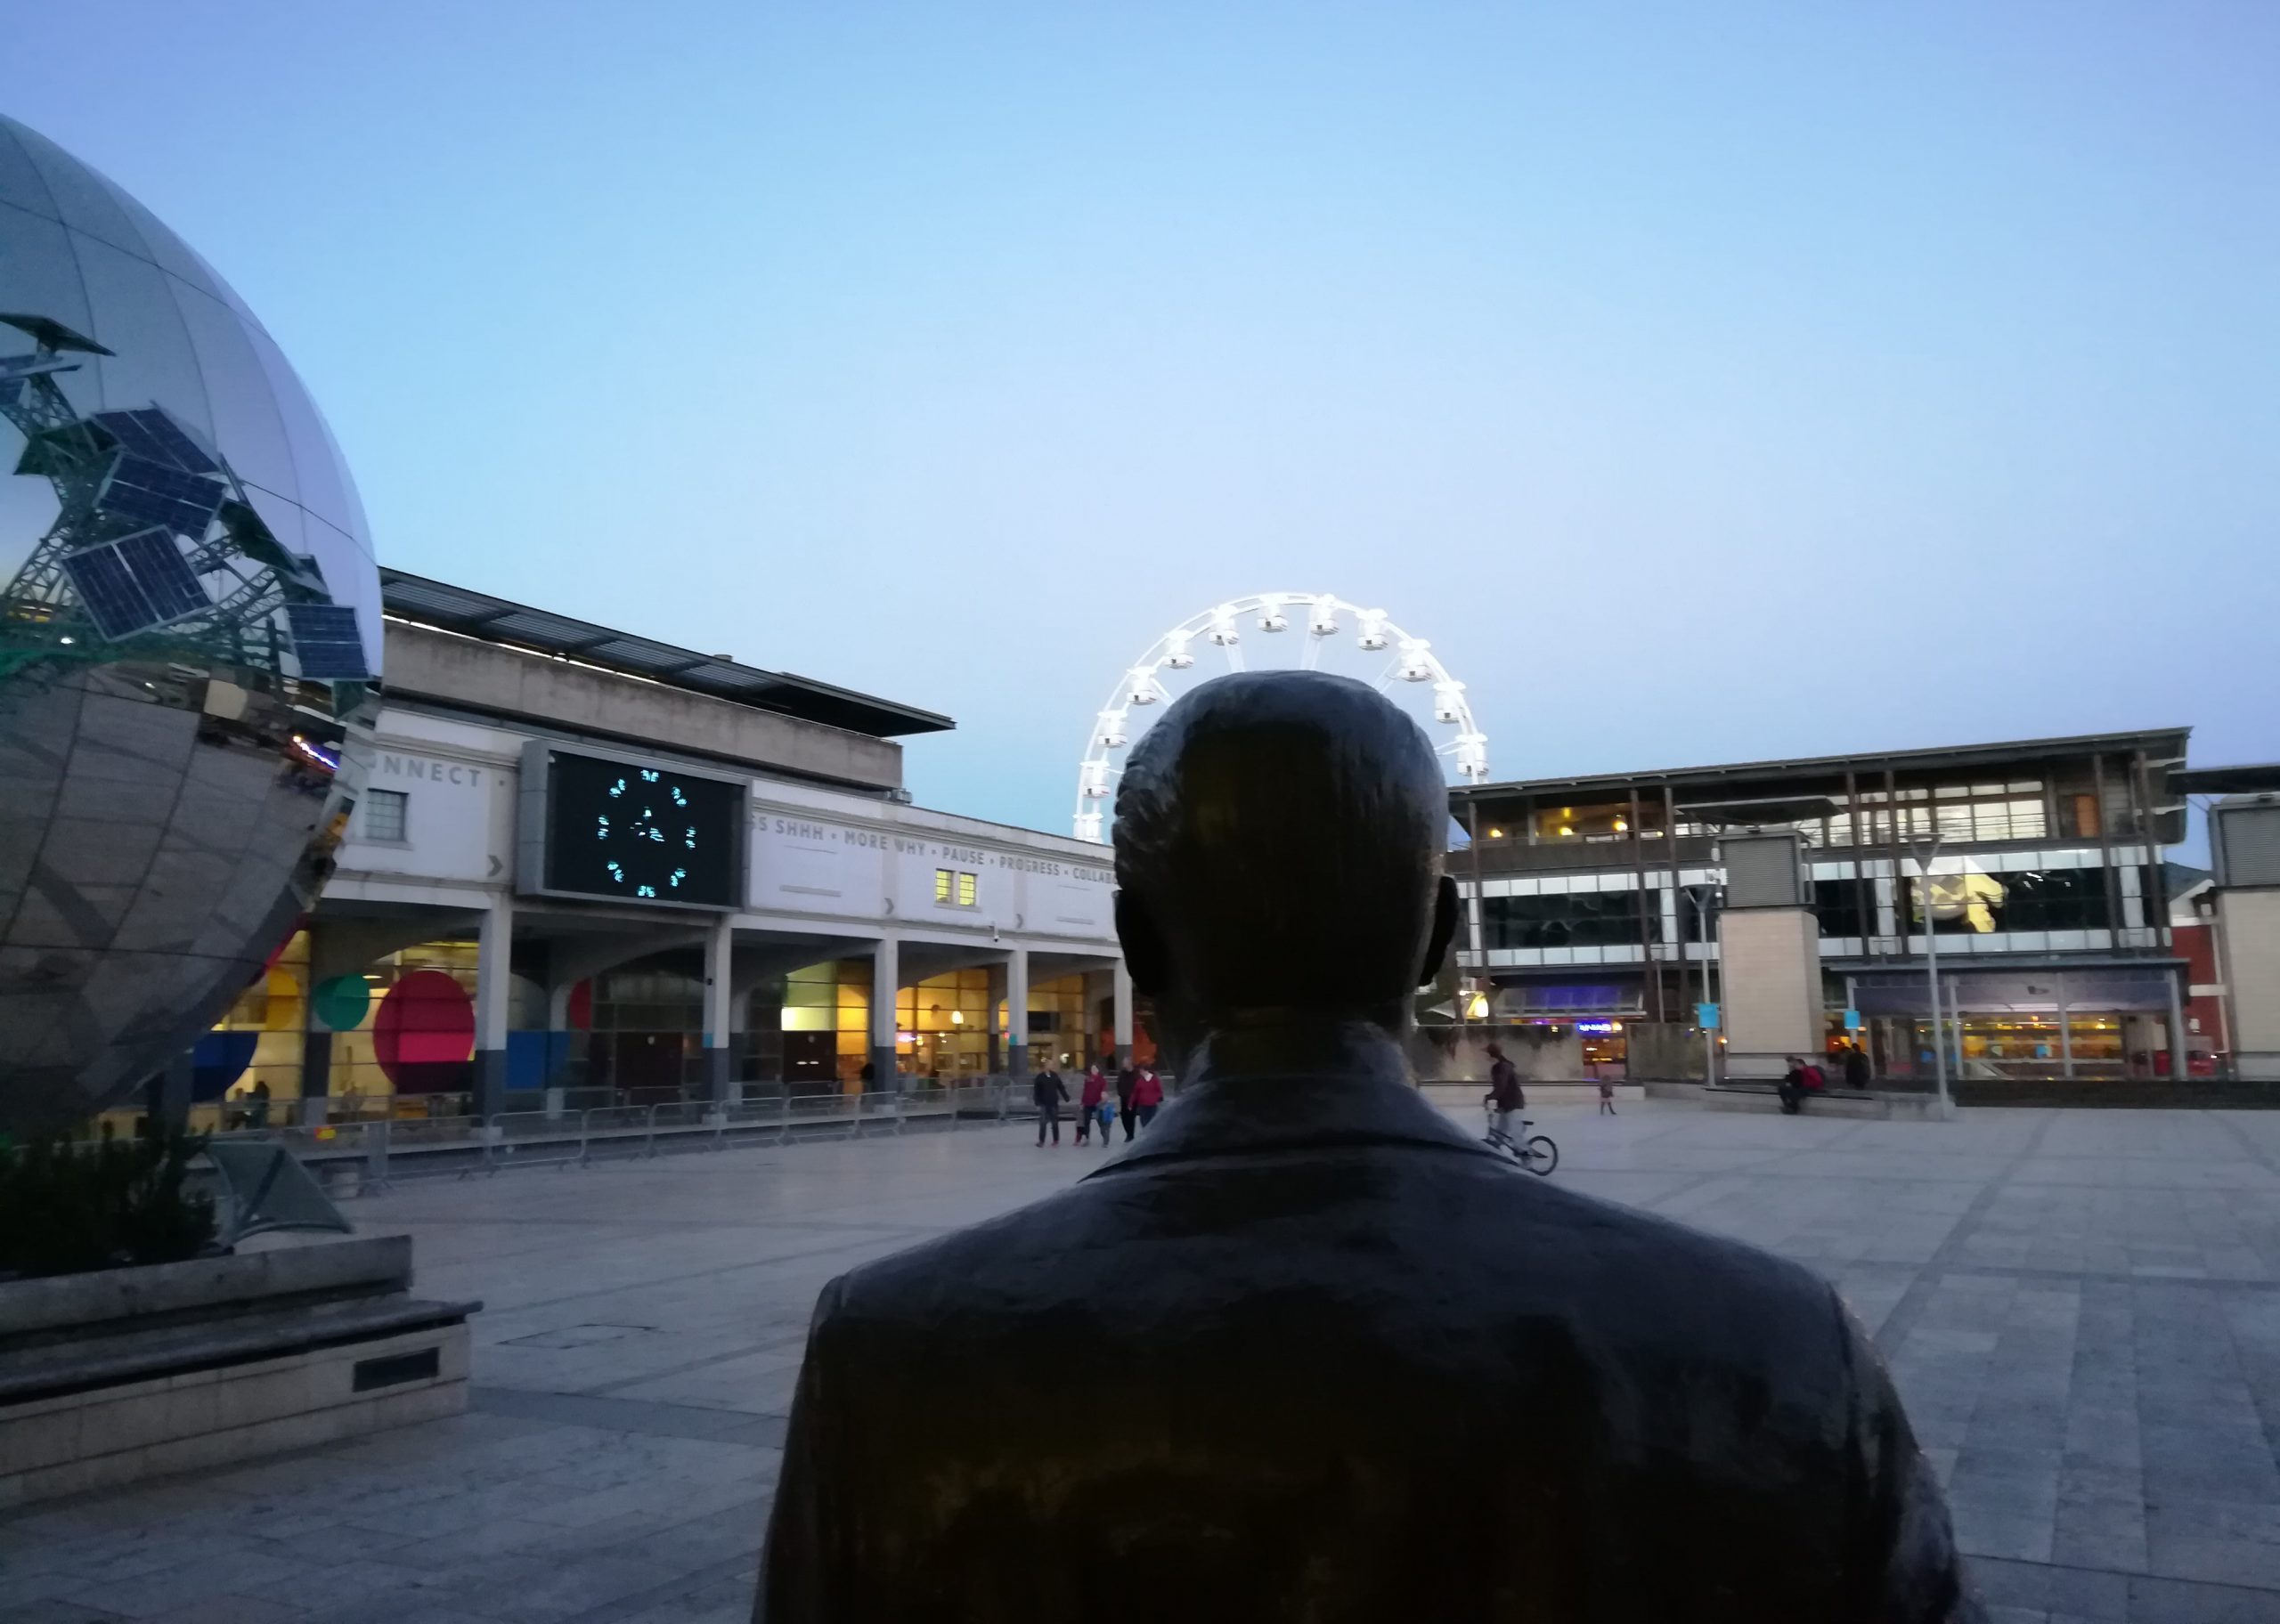 The Cary Grant statue in Millennium Square, Bristol, haloed by the ferris wheel